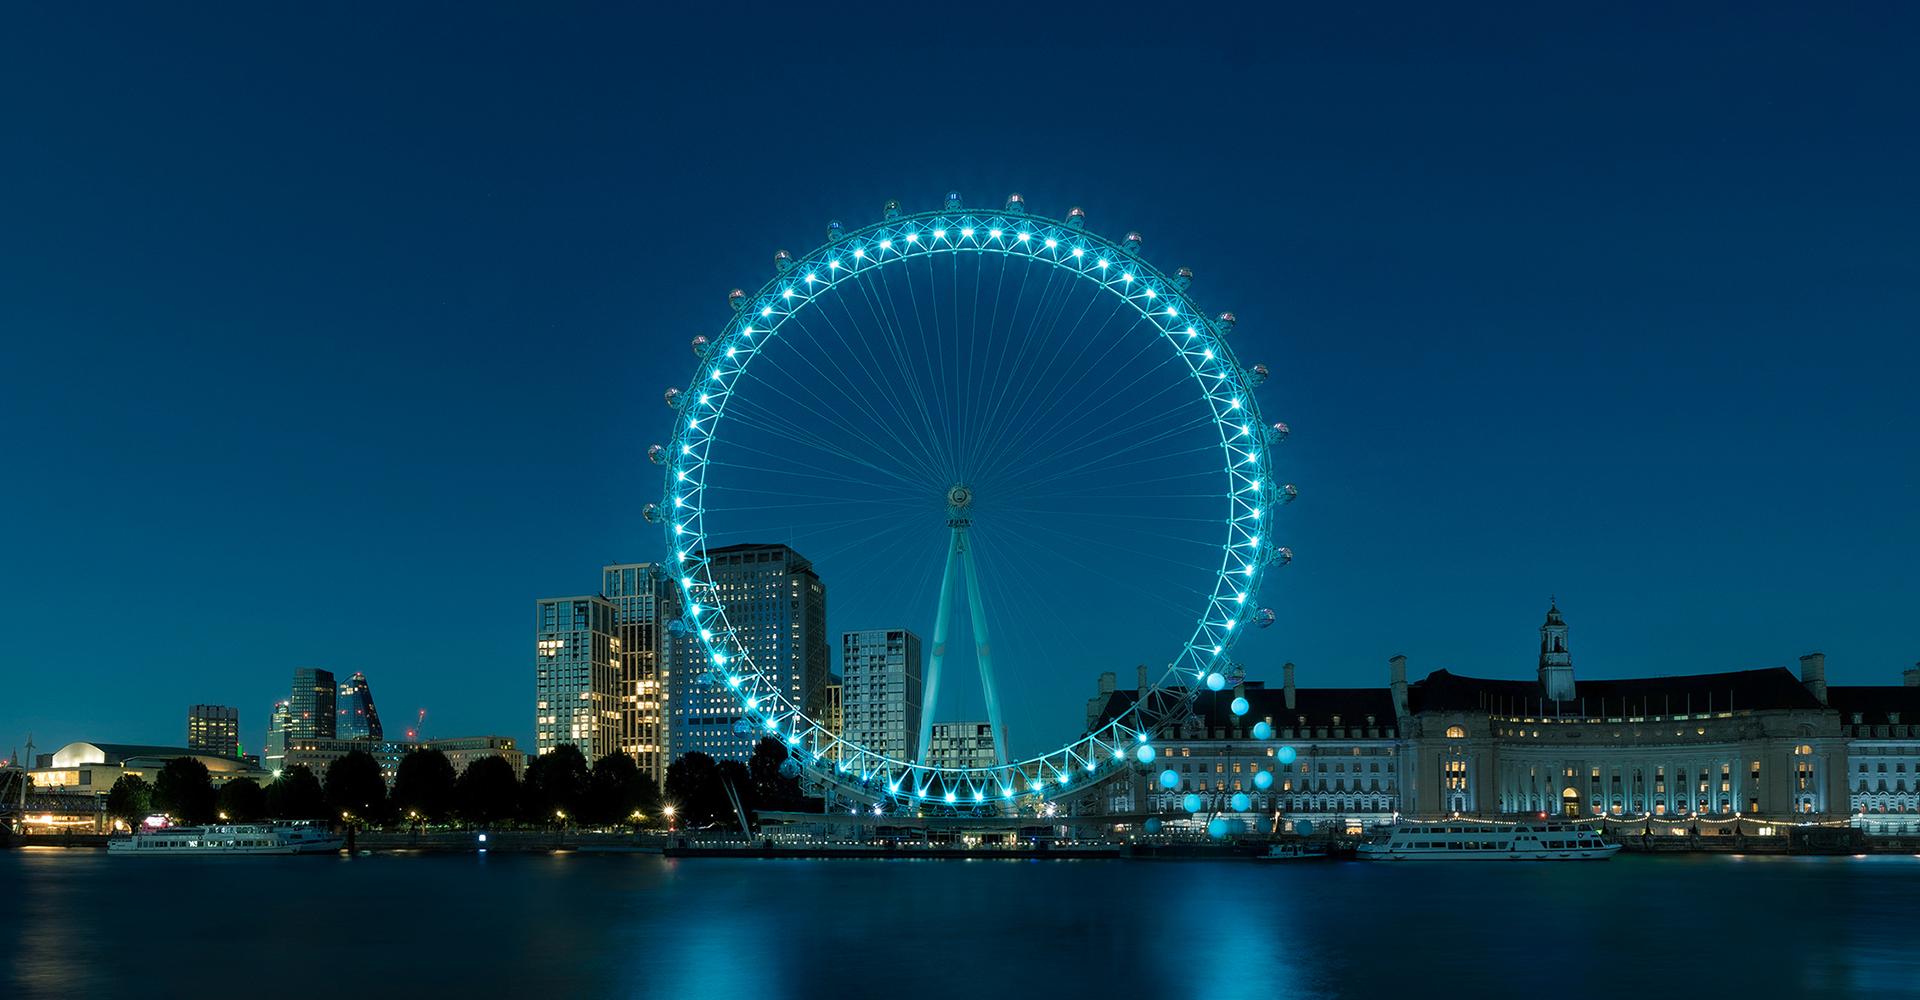 An image representing the launching campaign of the IONIQ brand based on London's iconic architecture